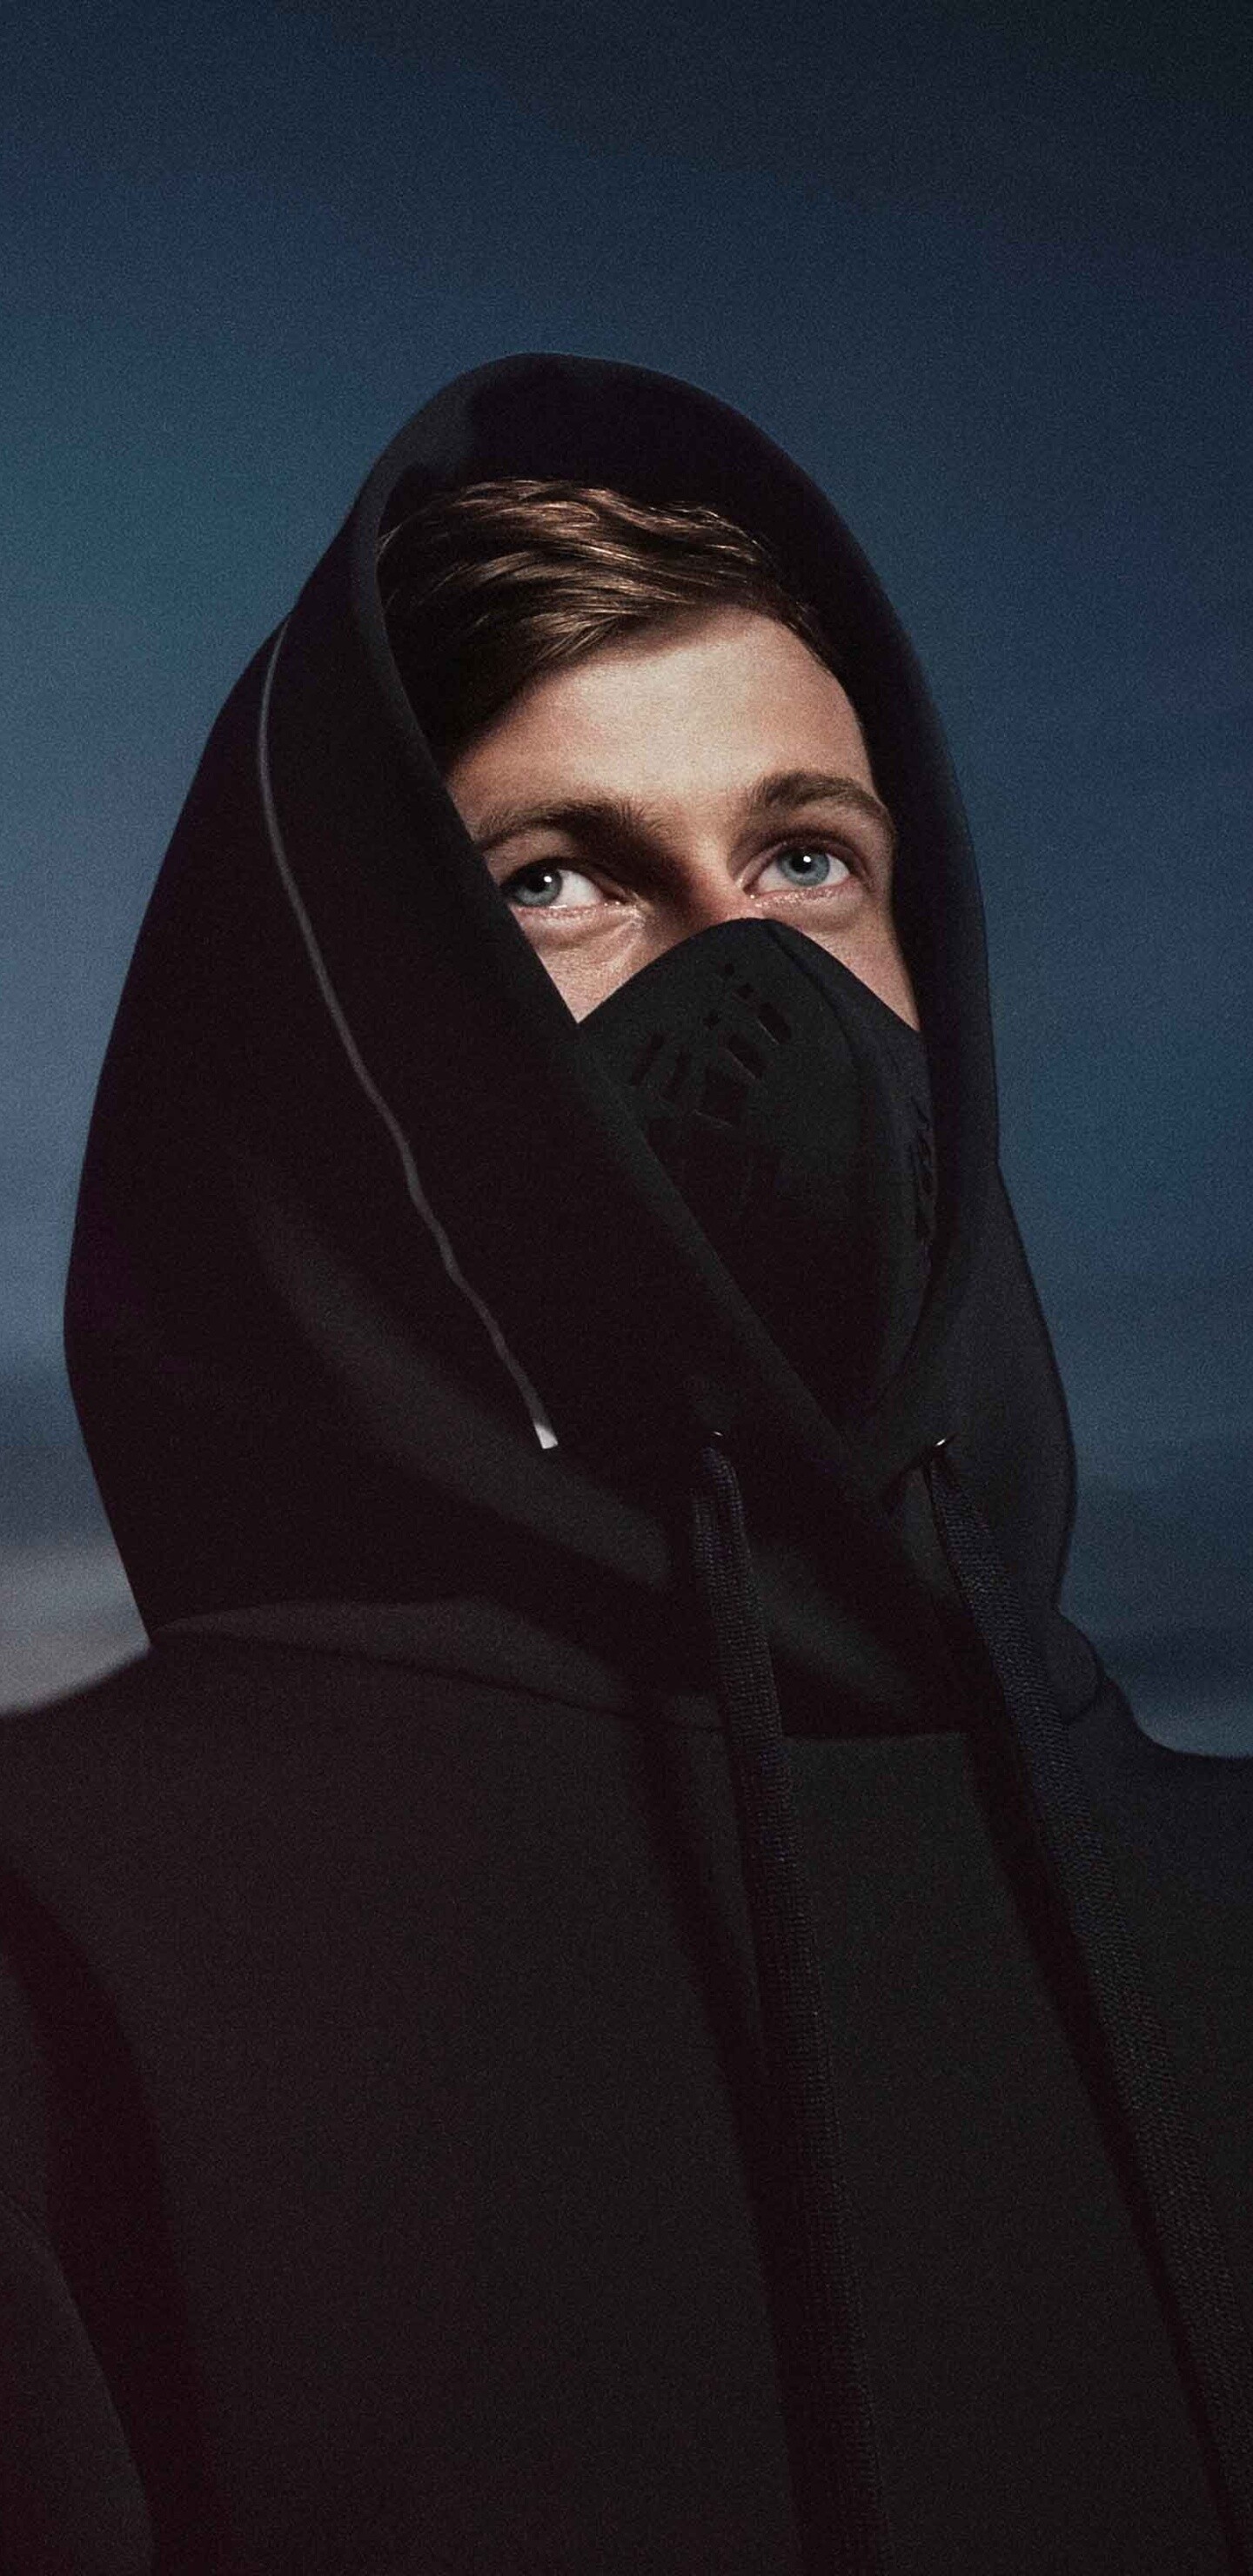 Alan Walker: DJ, Record producer, Renowned for his ability to craft hypnotic, high energy records. 1440x2960 HD Background.